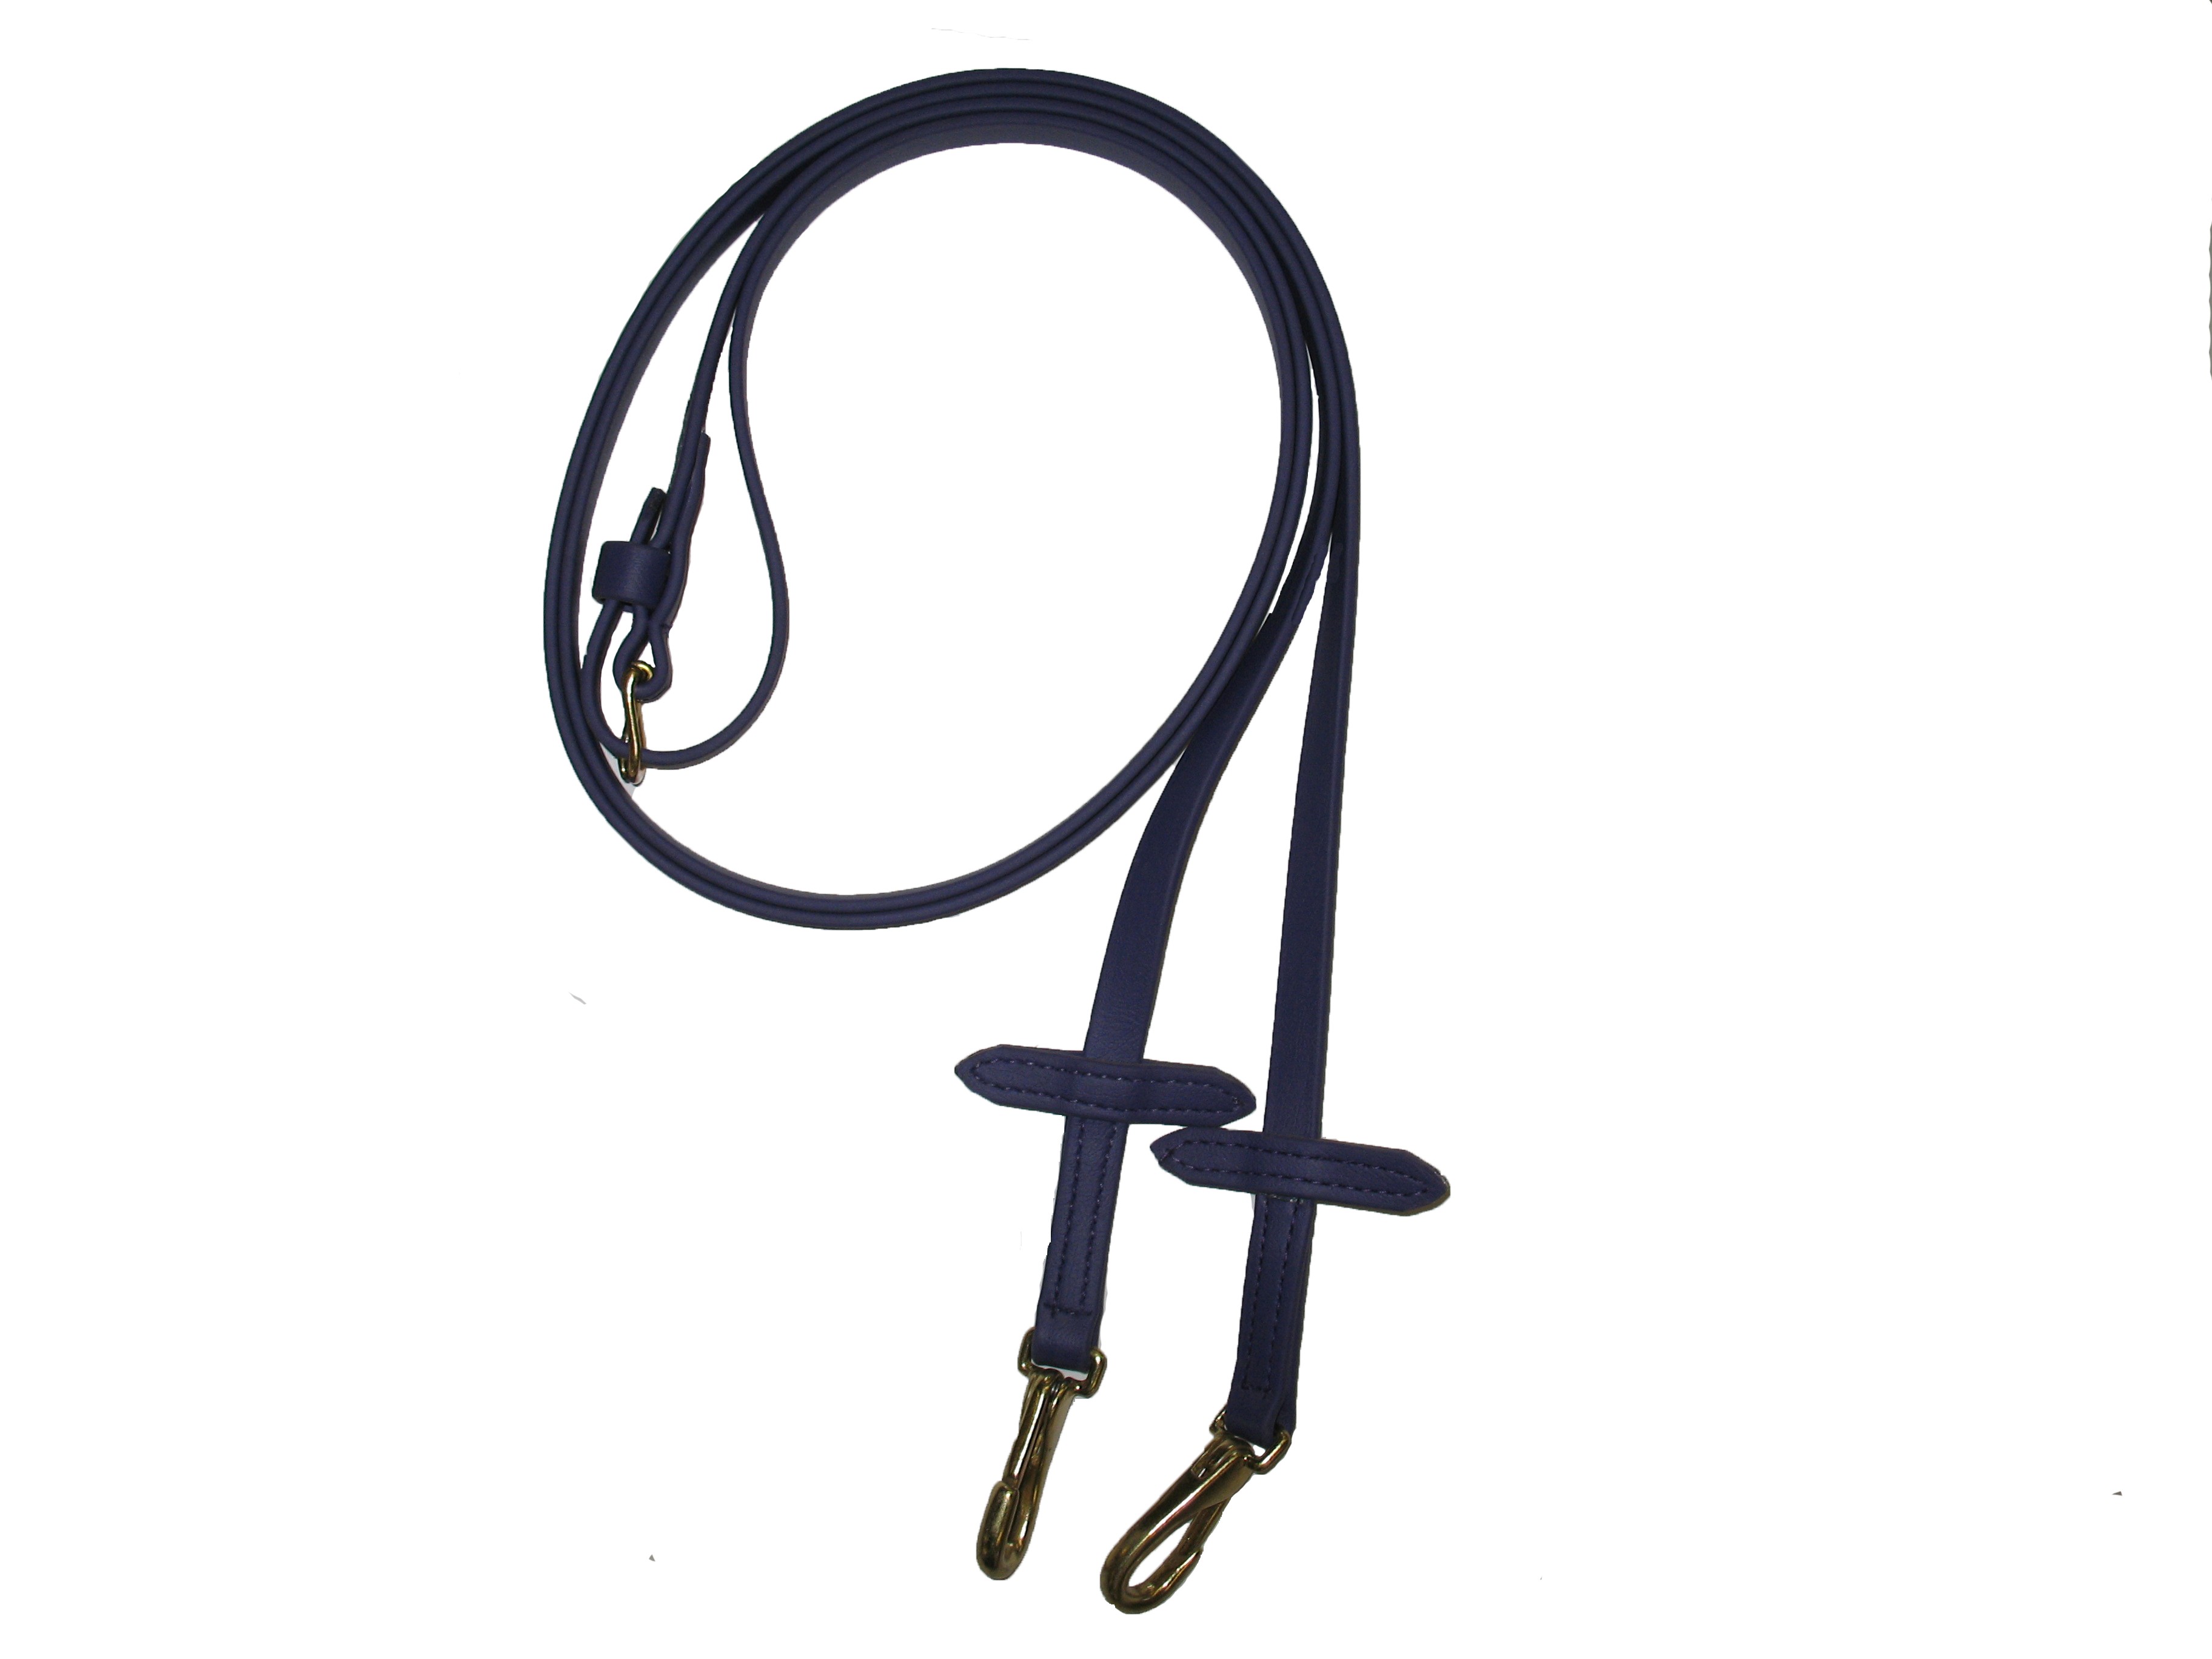 Beta Smooth  English Training Reins With Martingale Stops. Black or Brown.  Snaps or Buckles